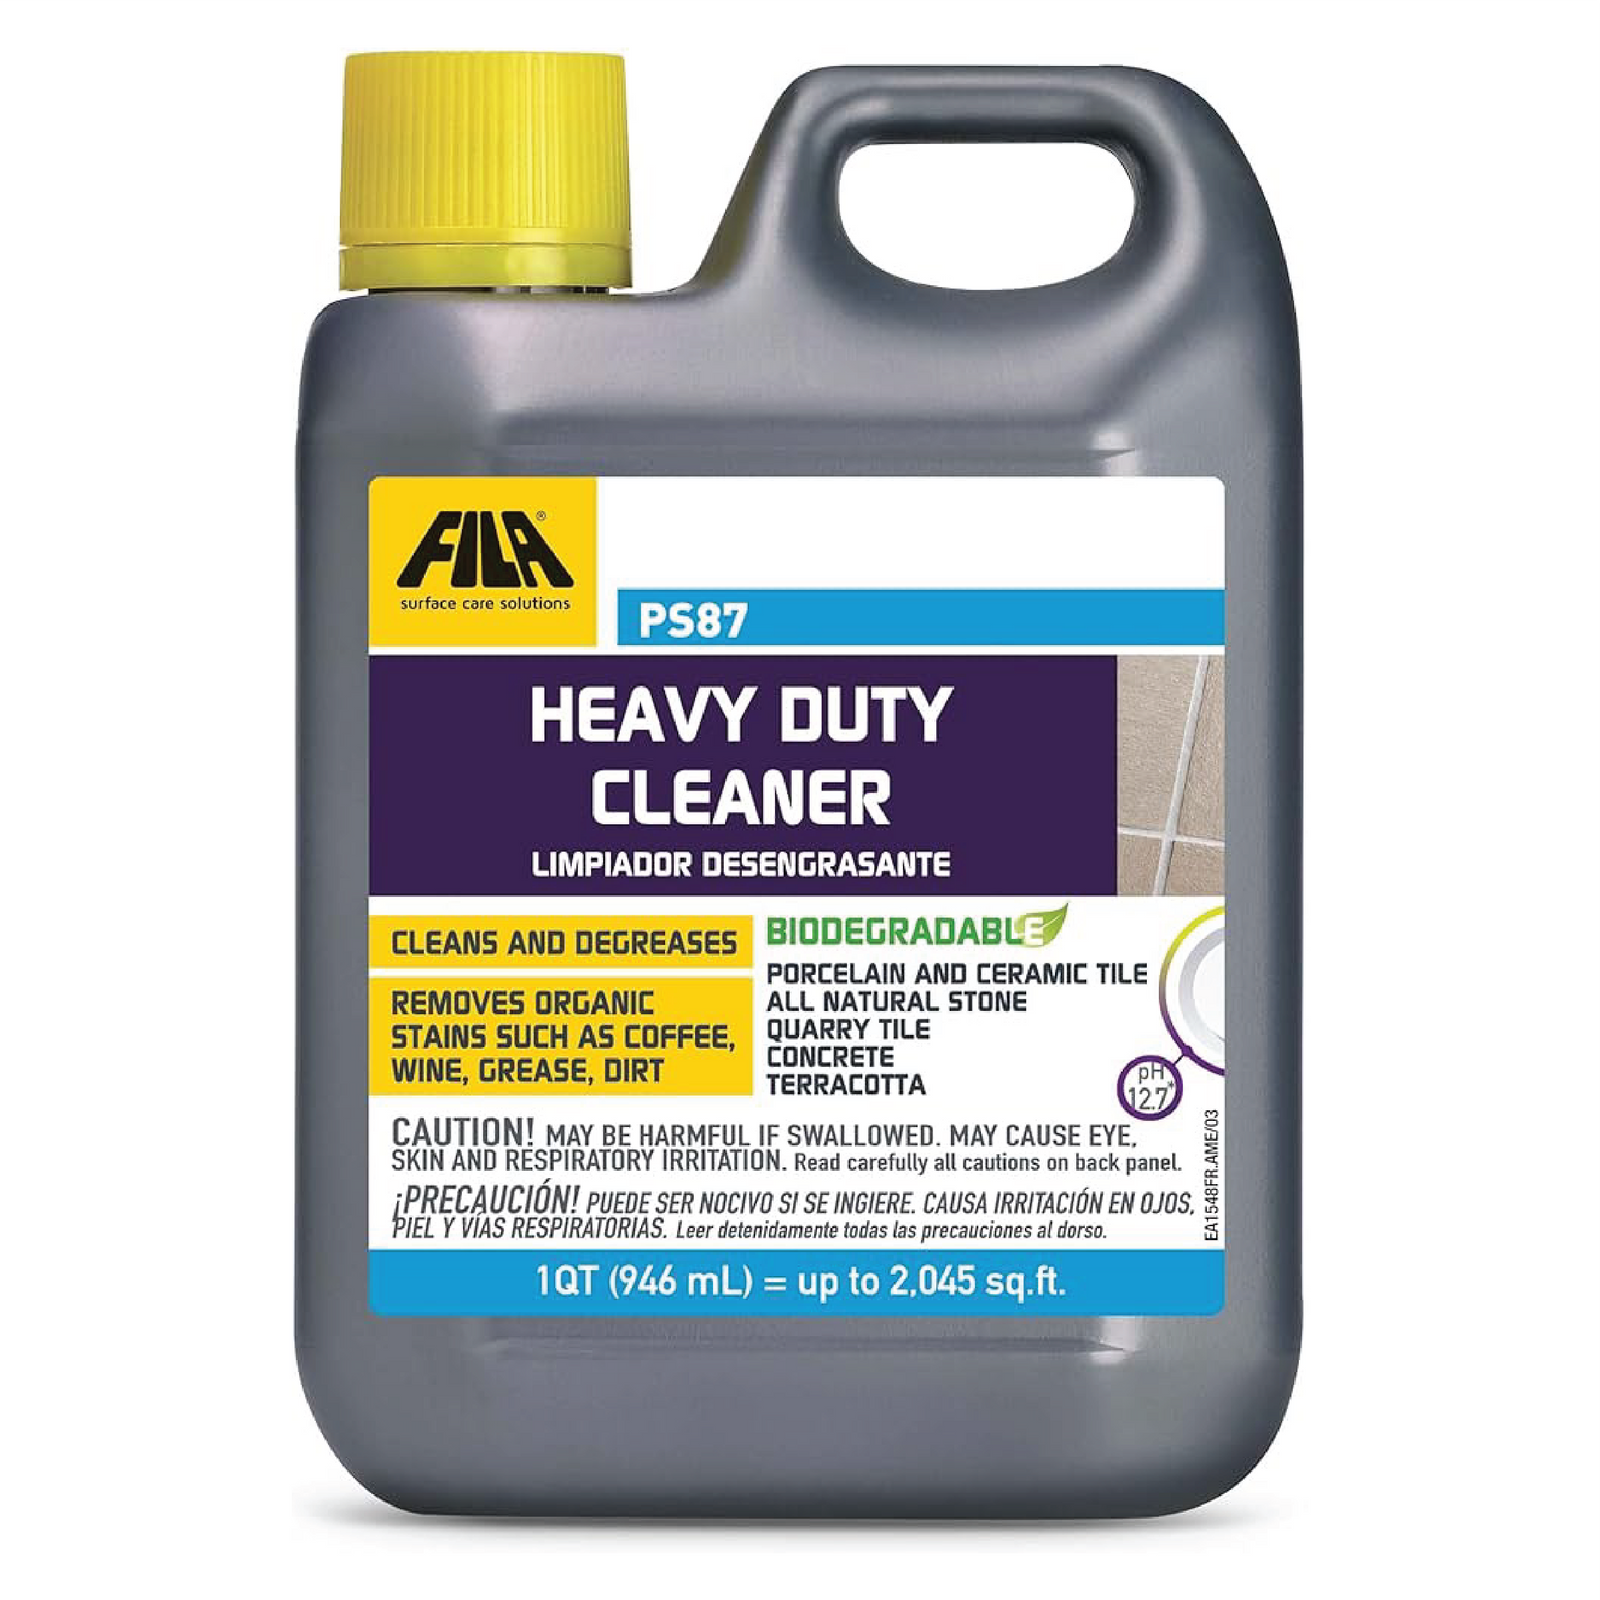 Fila PS87 Heavy Duty Cleaner for All Natural Stones, Ceramic and Porcelain Tiles - 946ml (2.045 sq.ft)